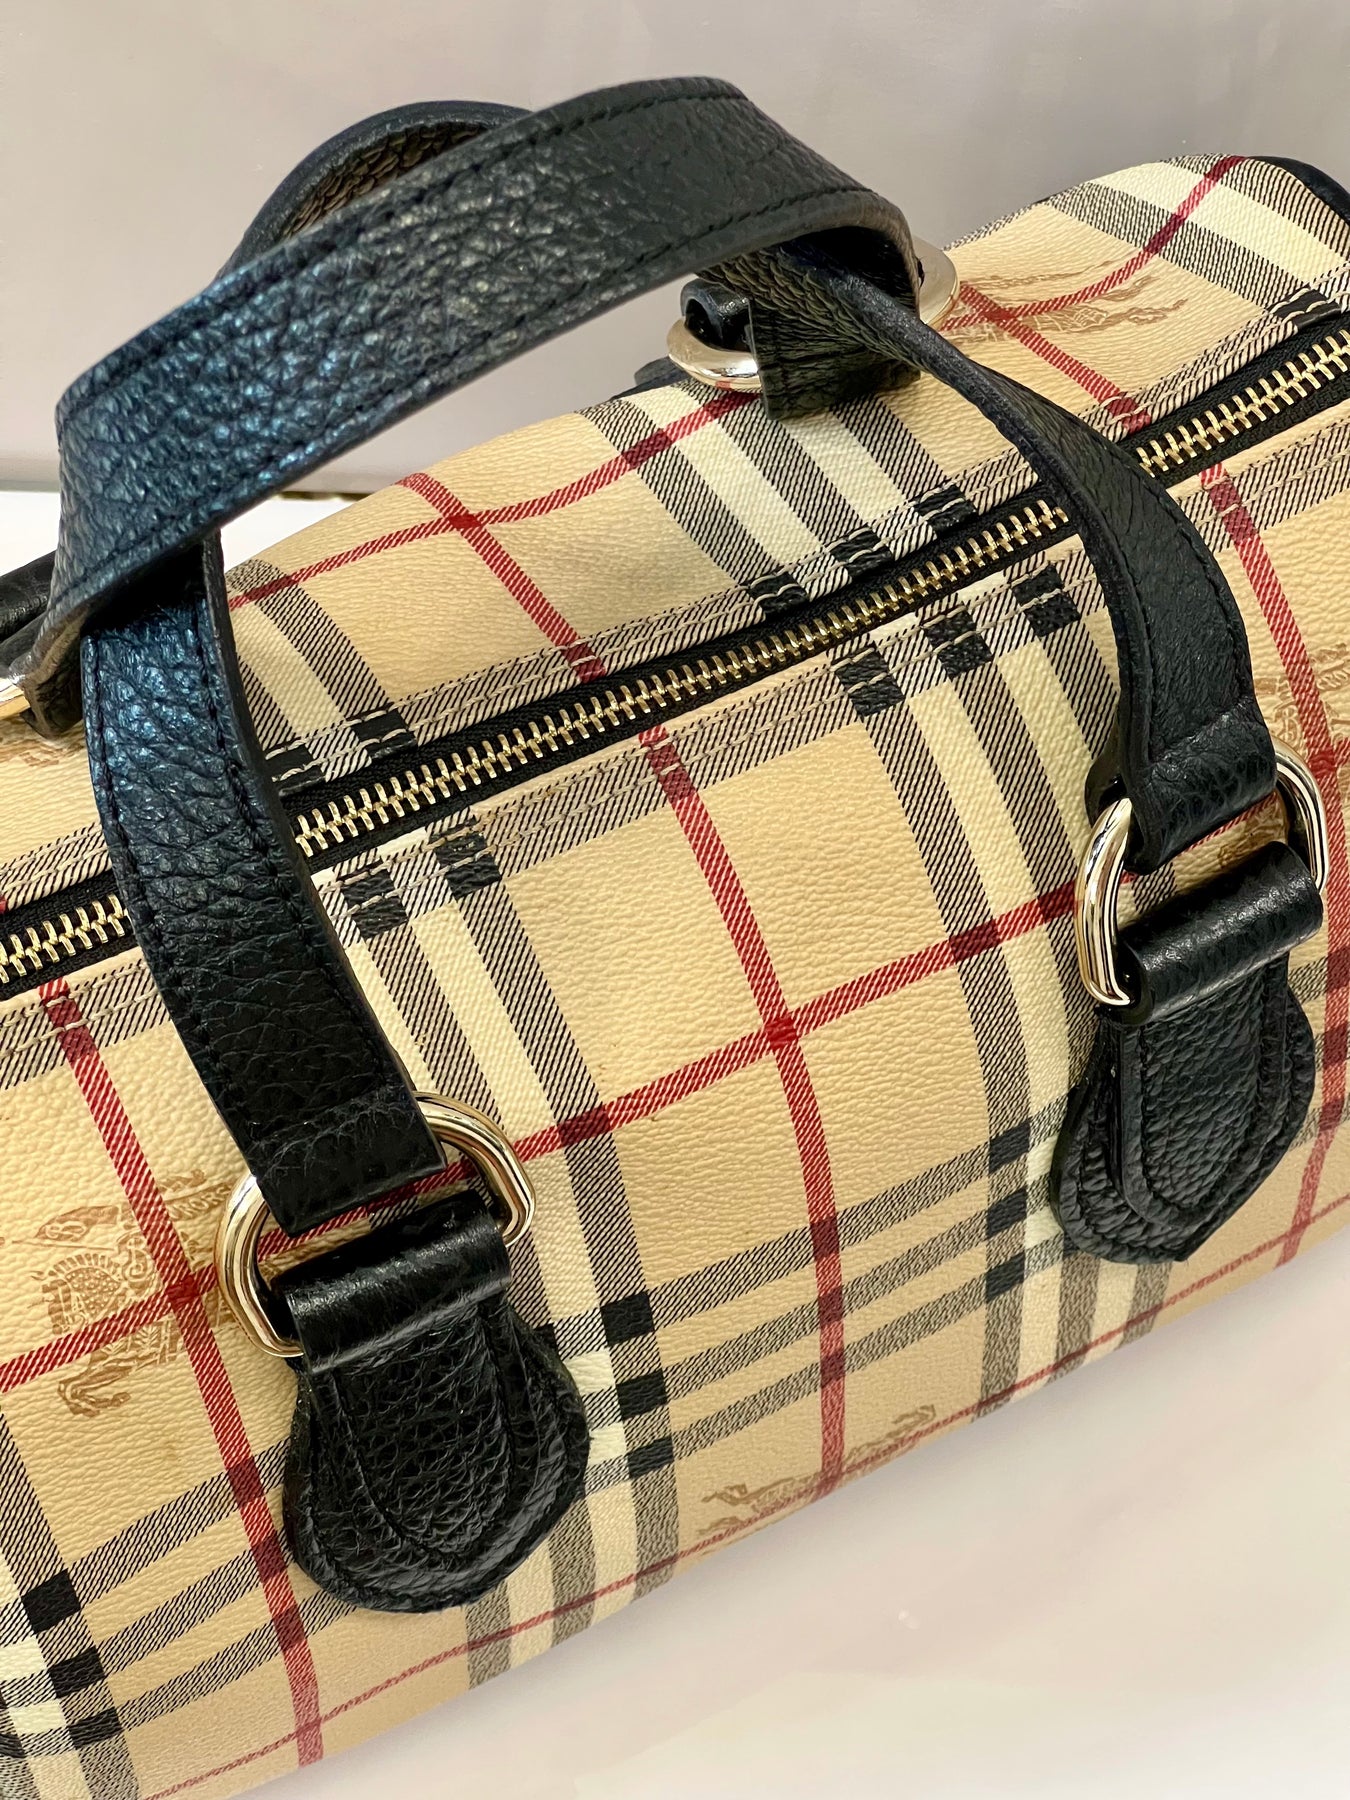 Burberry, Bags, Burberry Haymarket Check Small Chester Bowling Bag